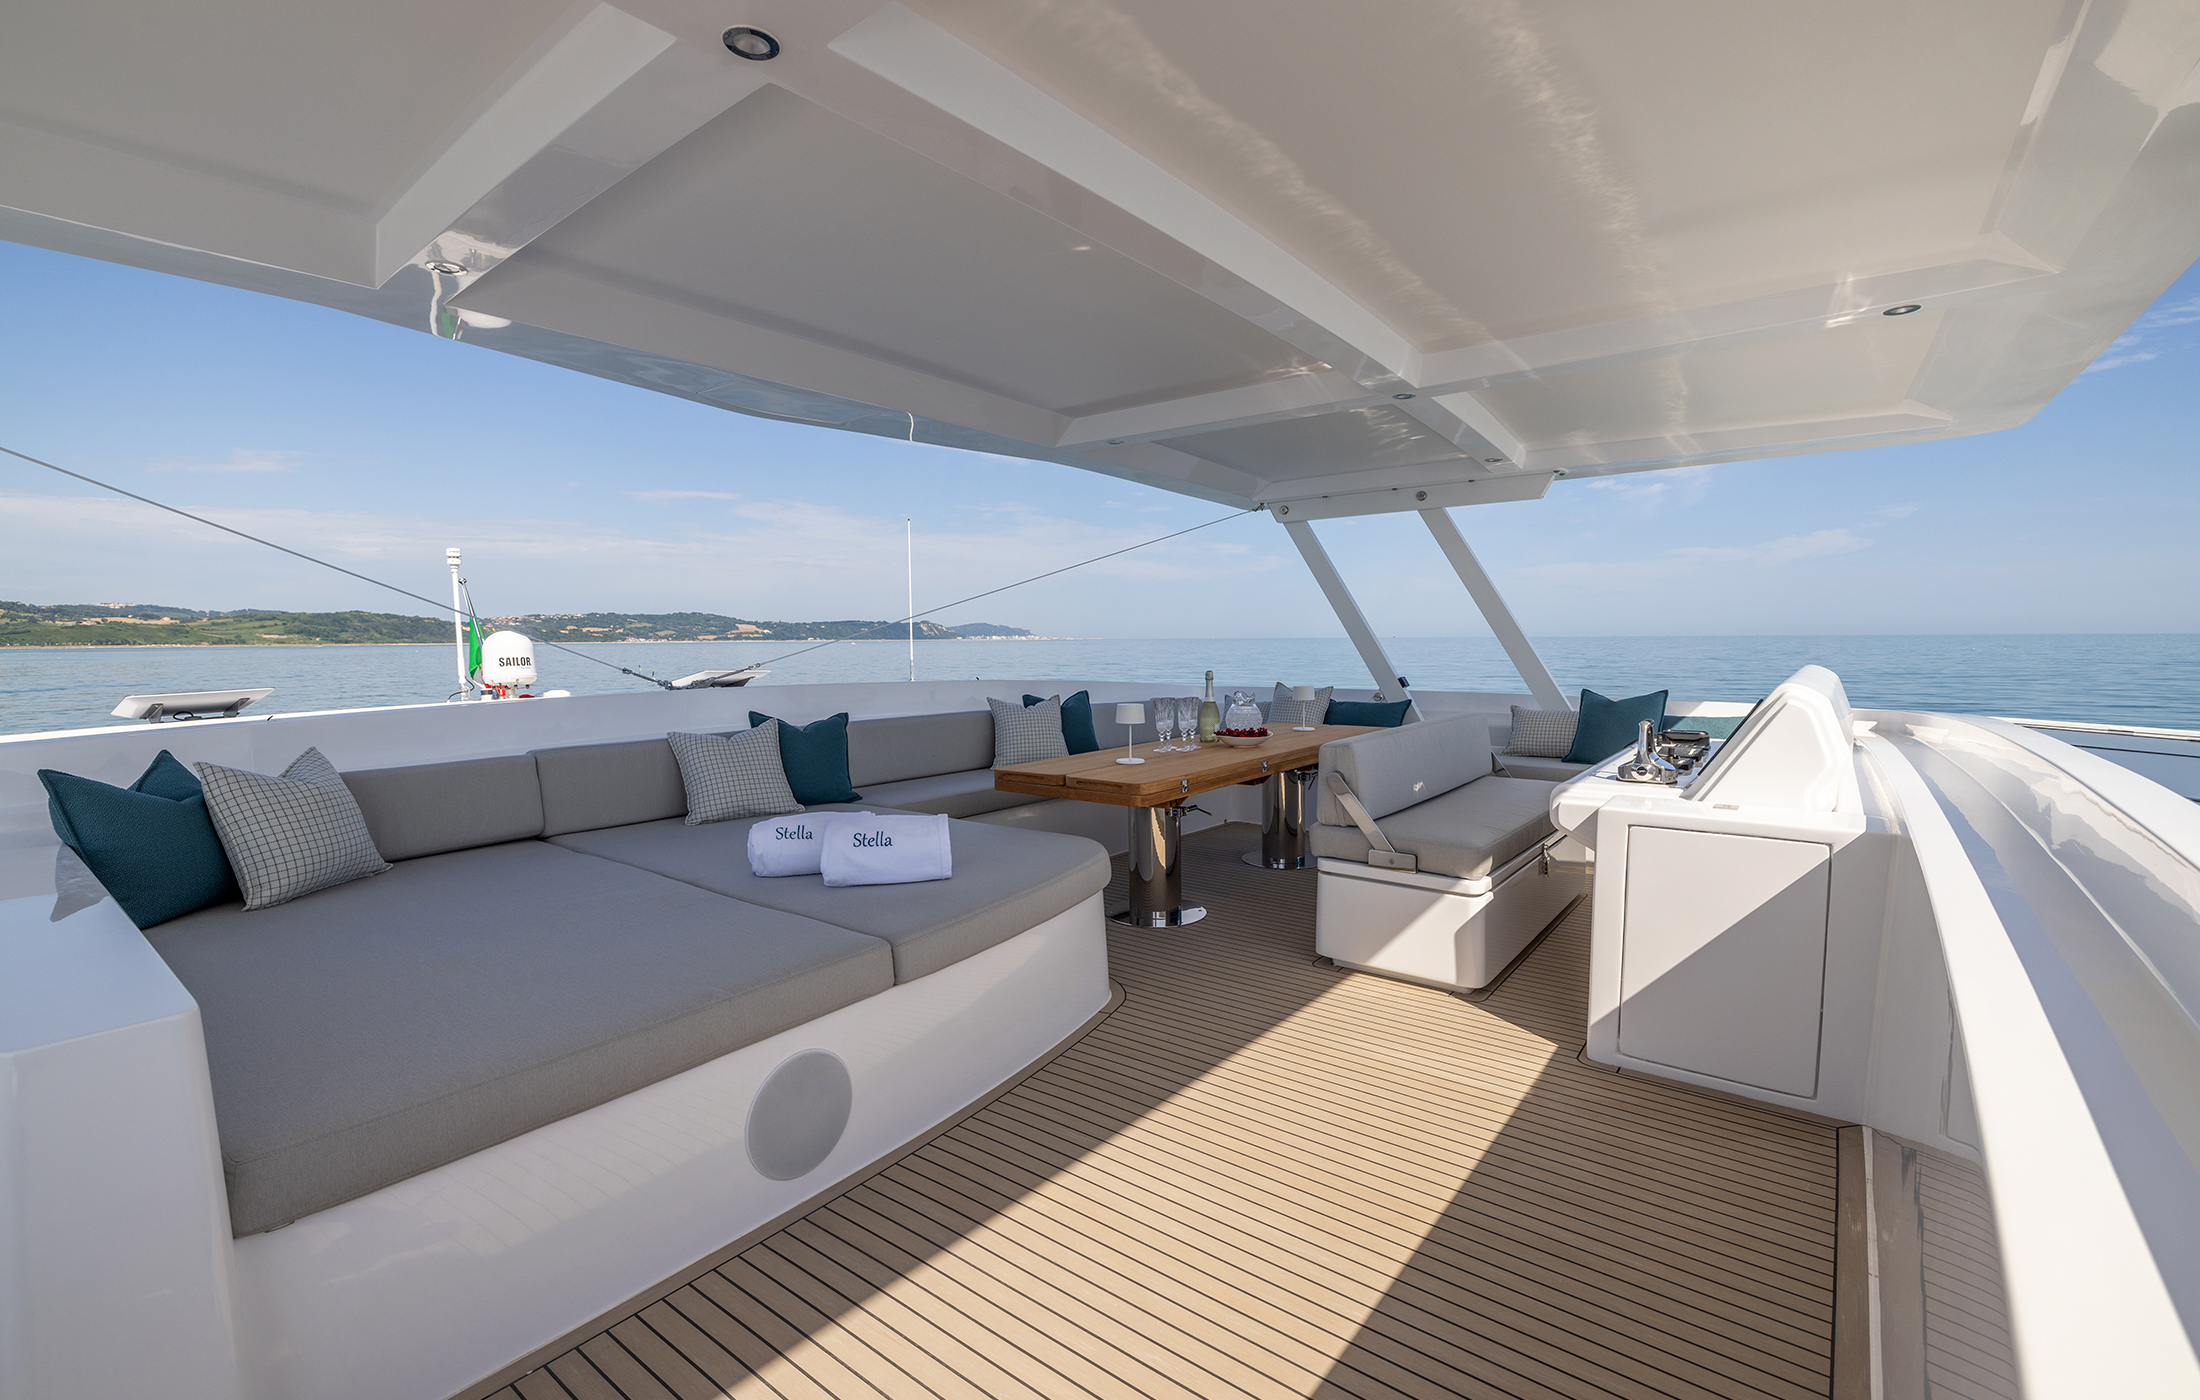 Interior of the flybridge on a yacht